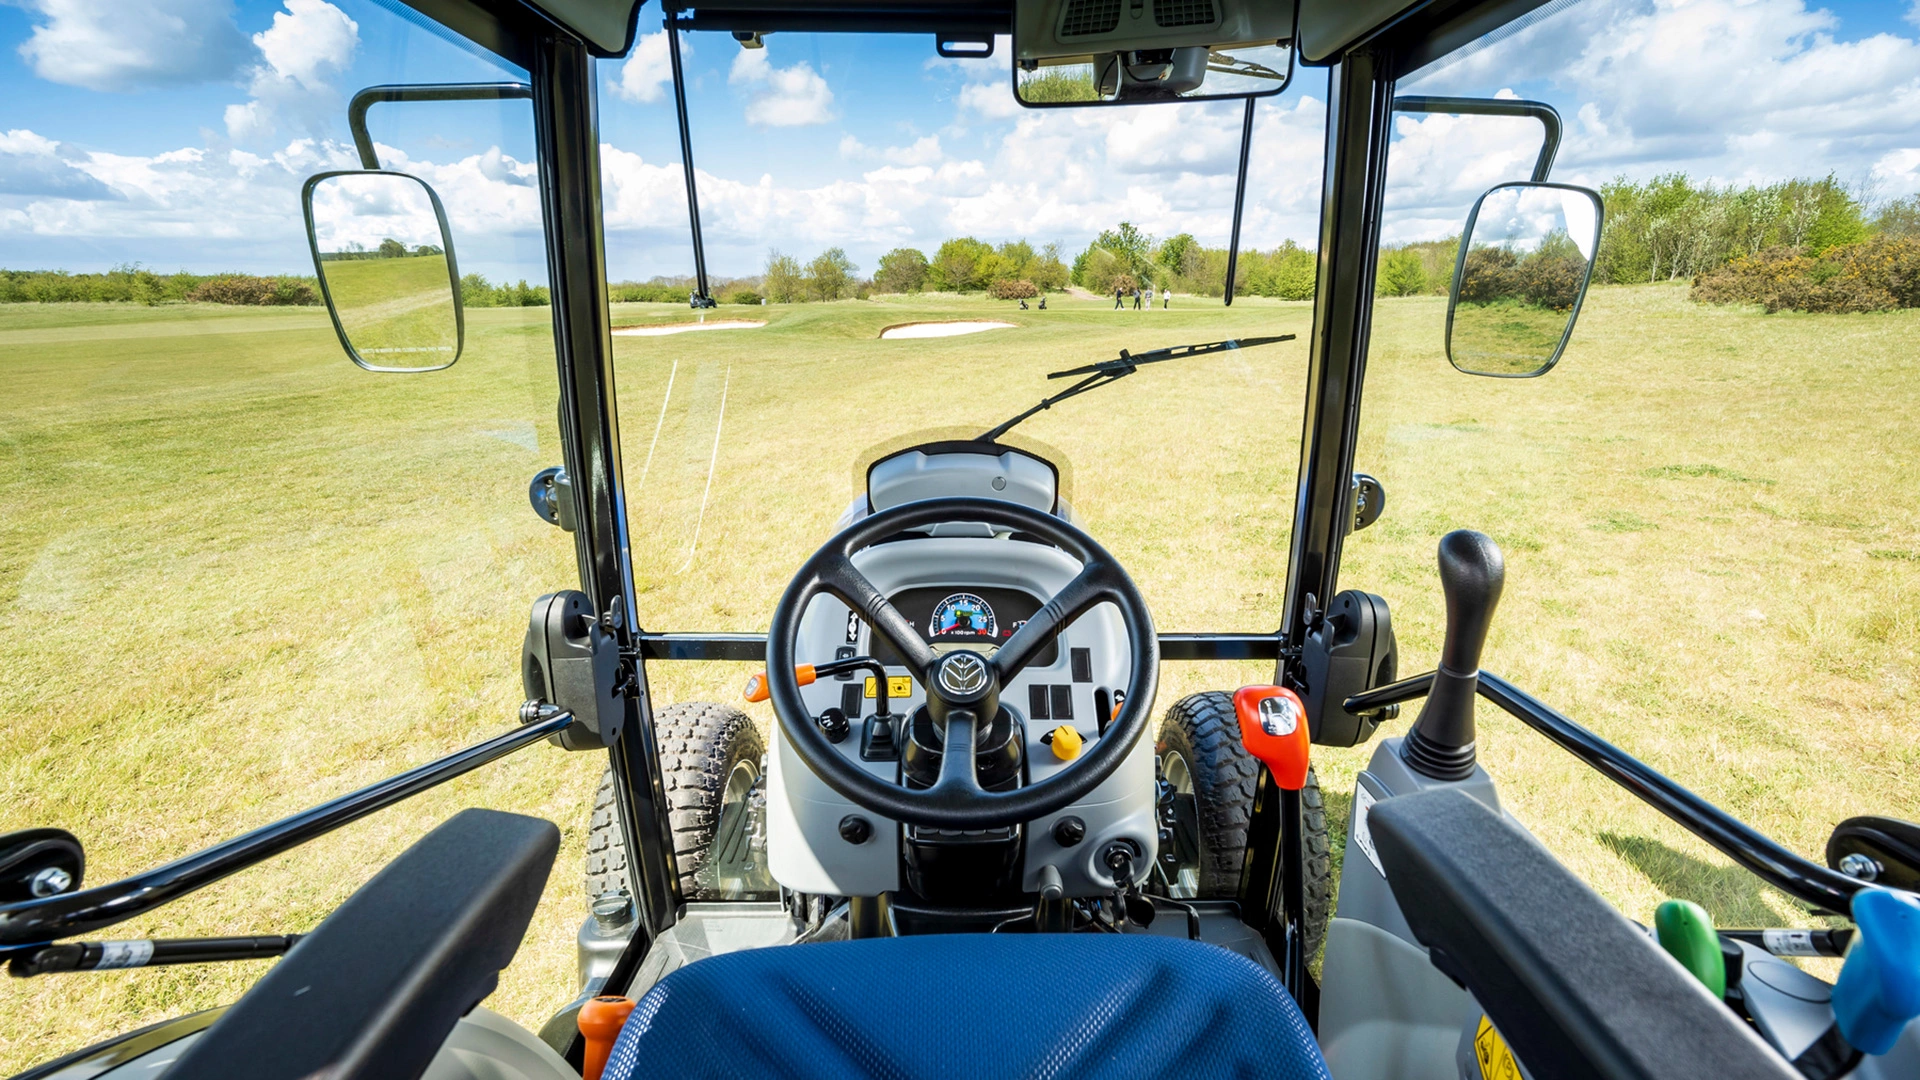 Inside the functional cabin of New Holland Boomer tractor showcasing controls